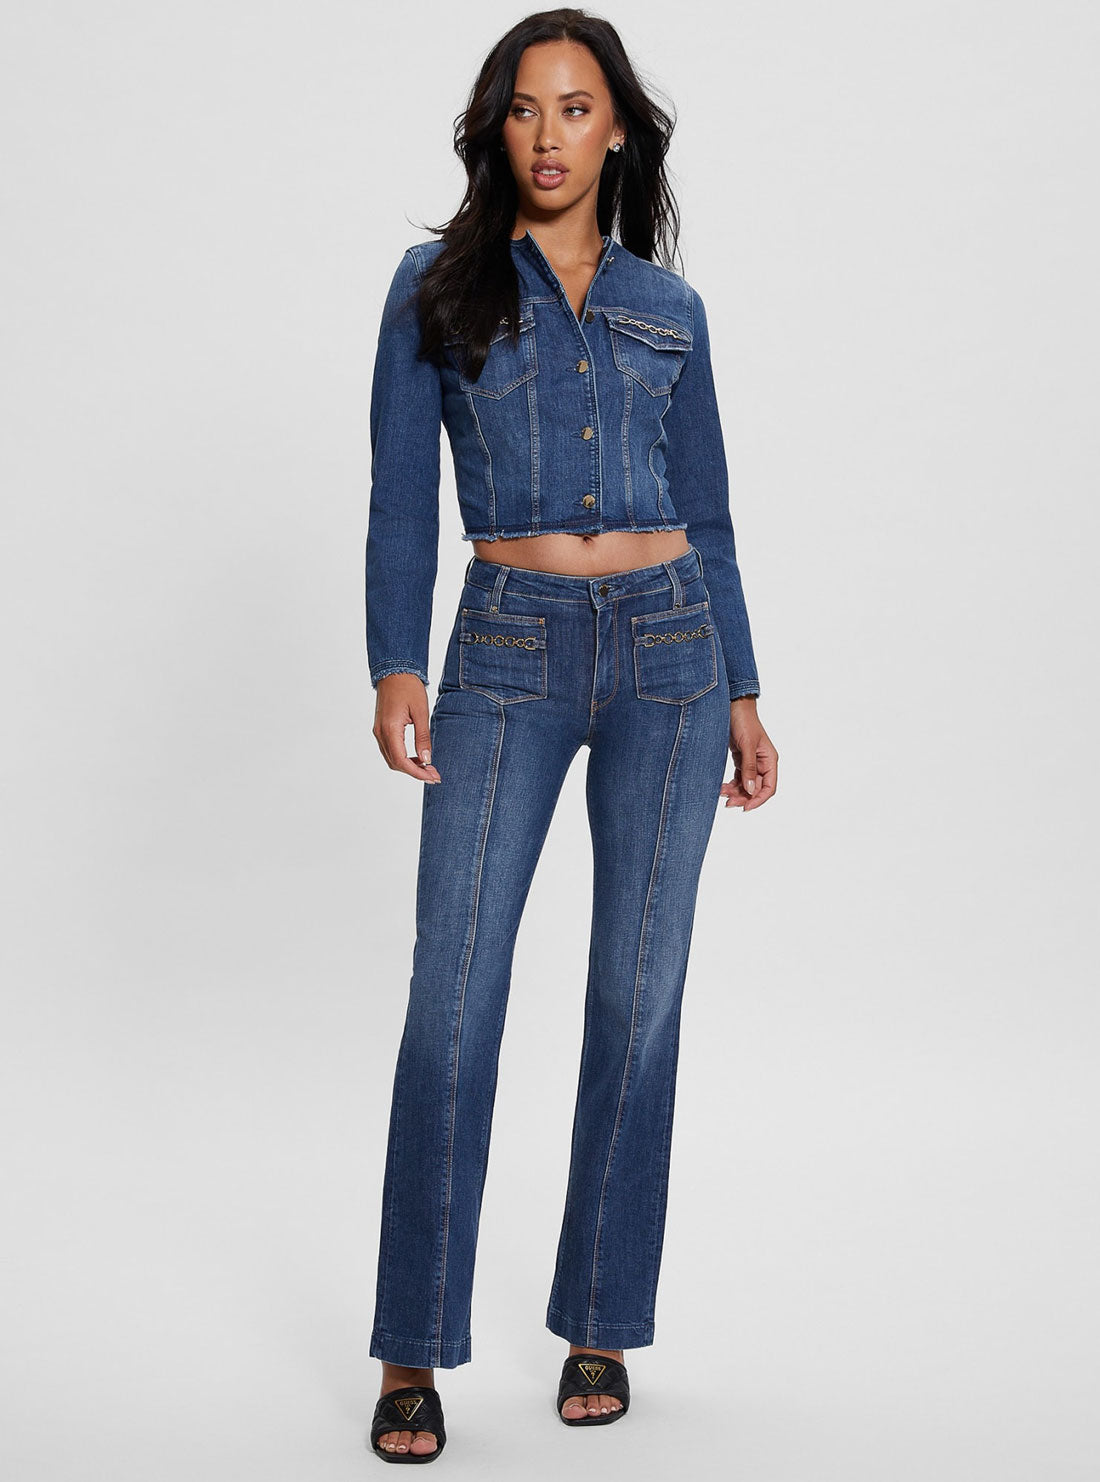 Eco Blue Chain Pocket Sexy Bootcut Denim Jeans | GUESS Women's Apparel | full view